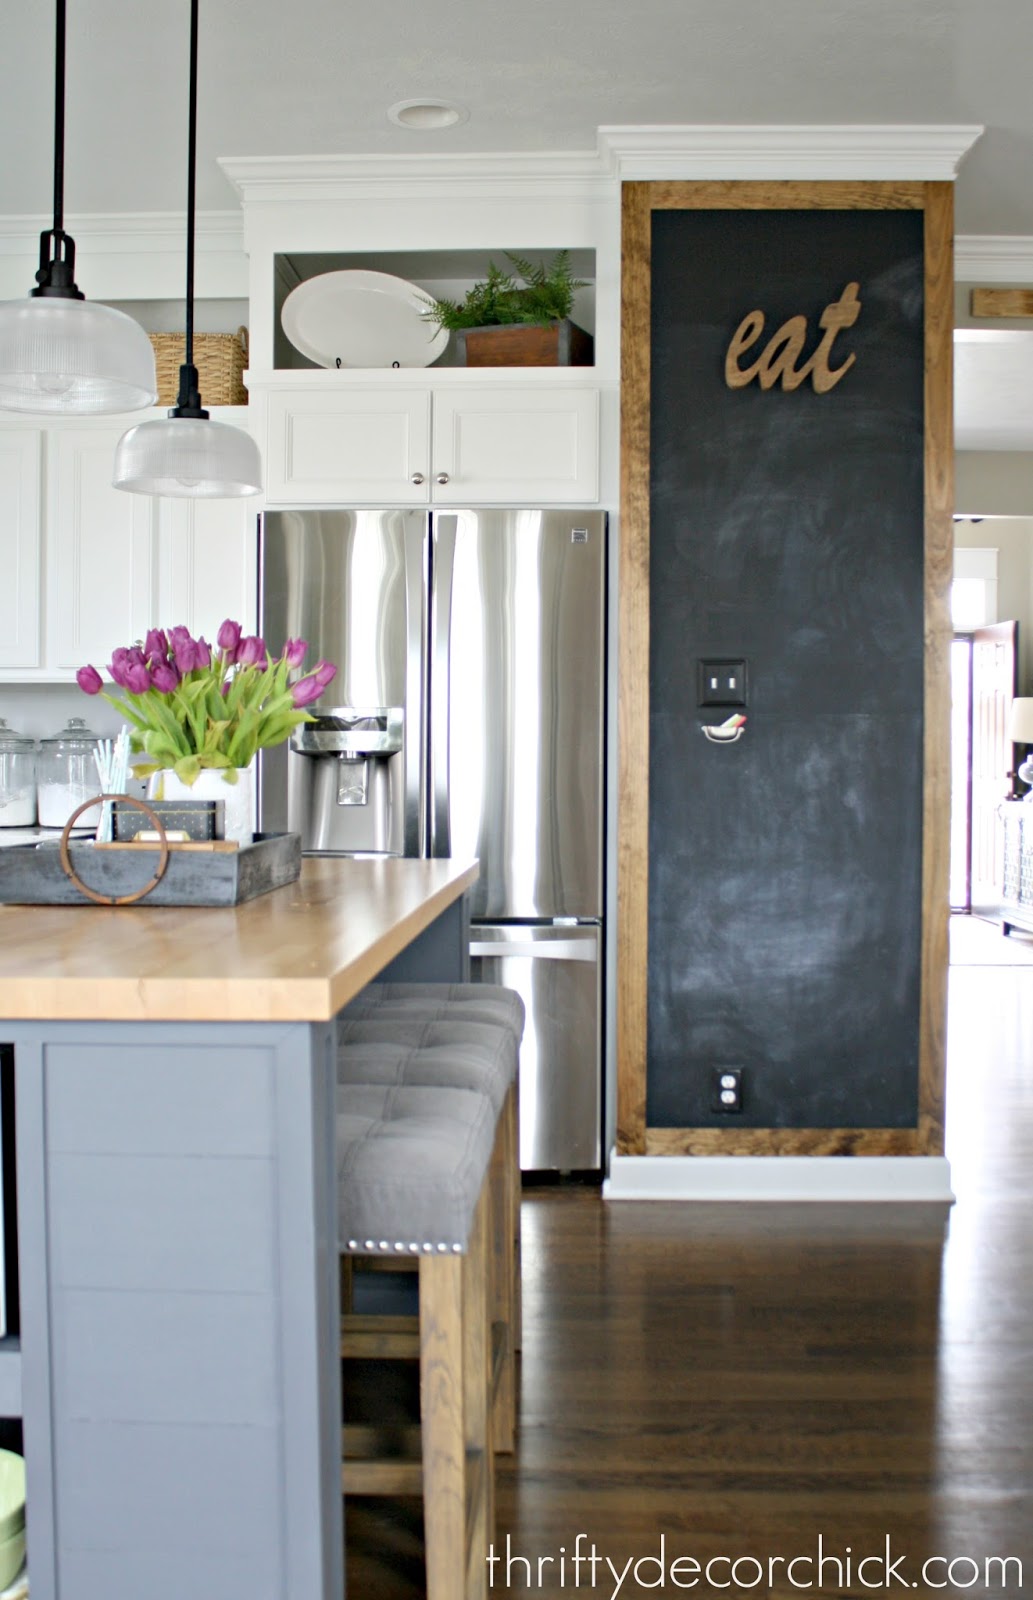 Adding Some Rustic Charm To The Kitchen From Thrifty Decor Chick